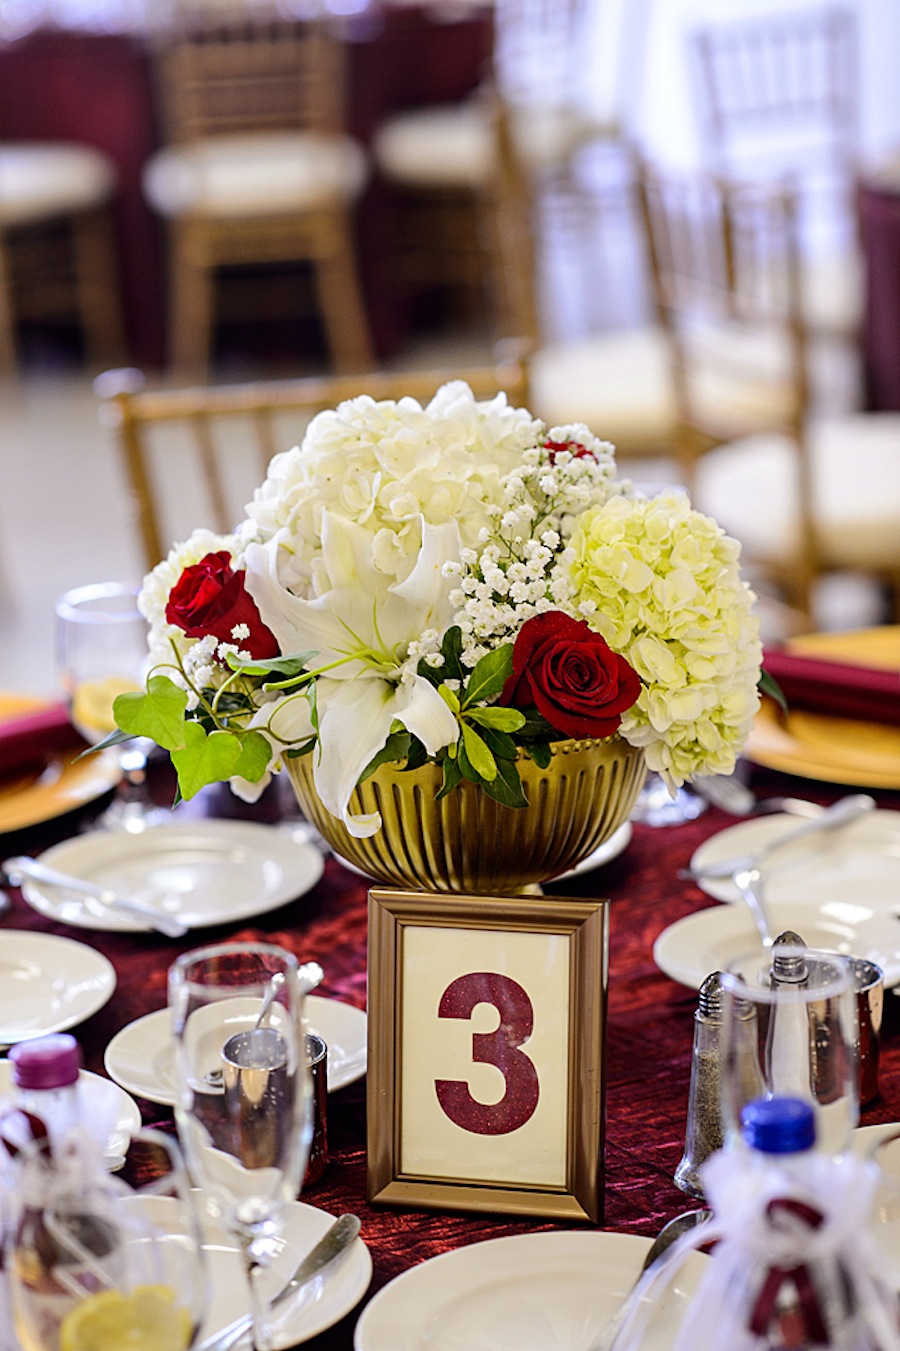 Low Red Rose and White Flower Wedding Centerpieces